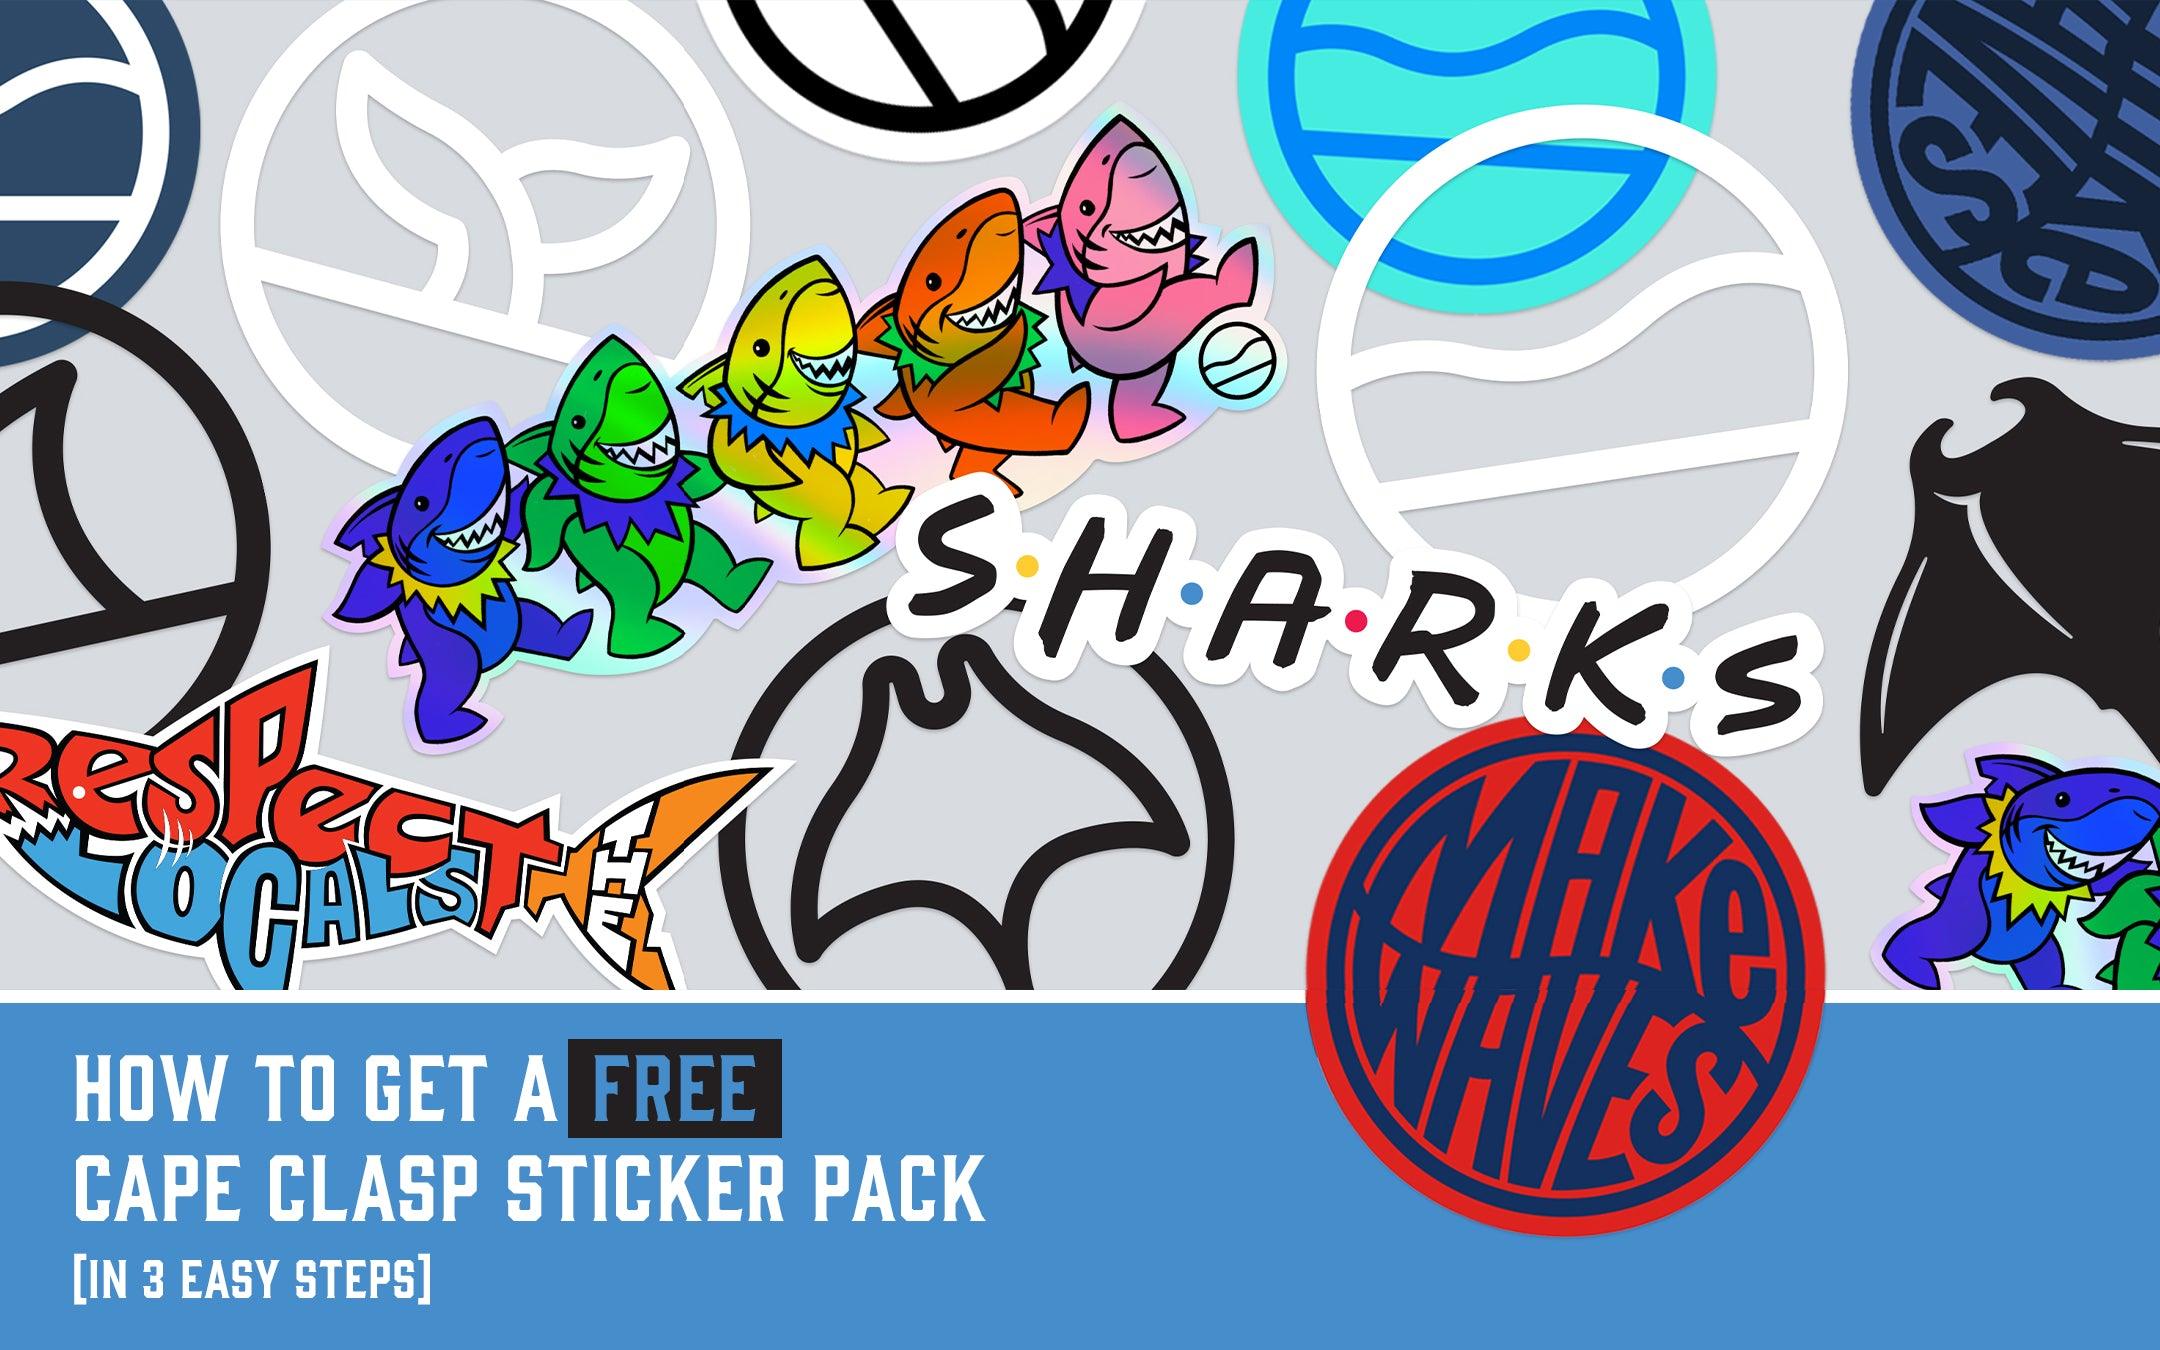 HOW TO GET A FREE CAPE CLASP STICKER PACK - Cape Clasp